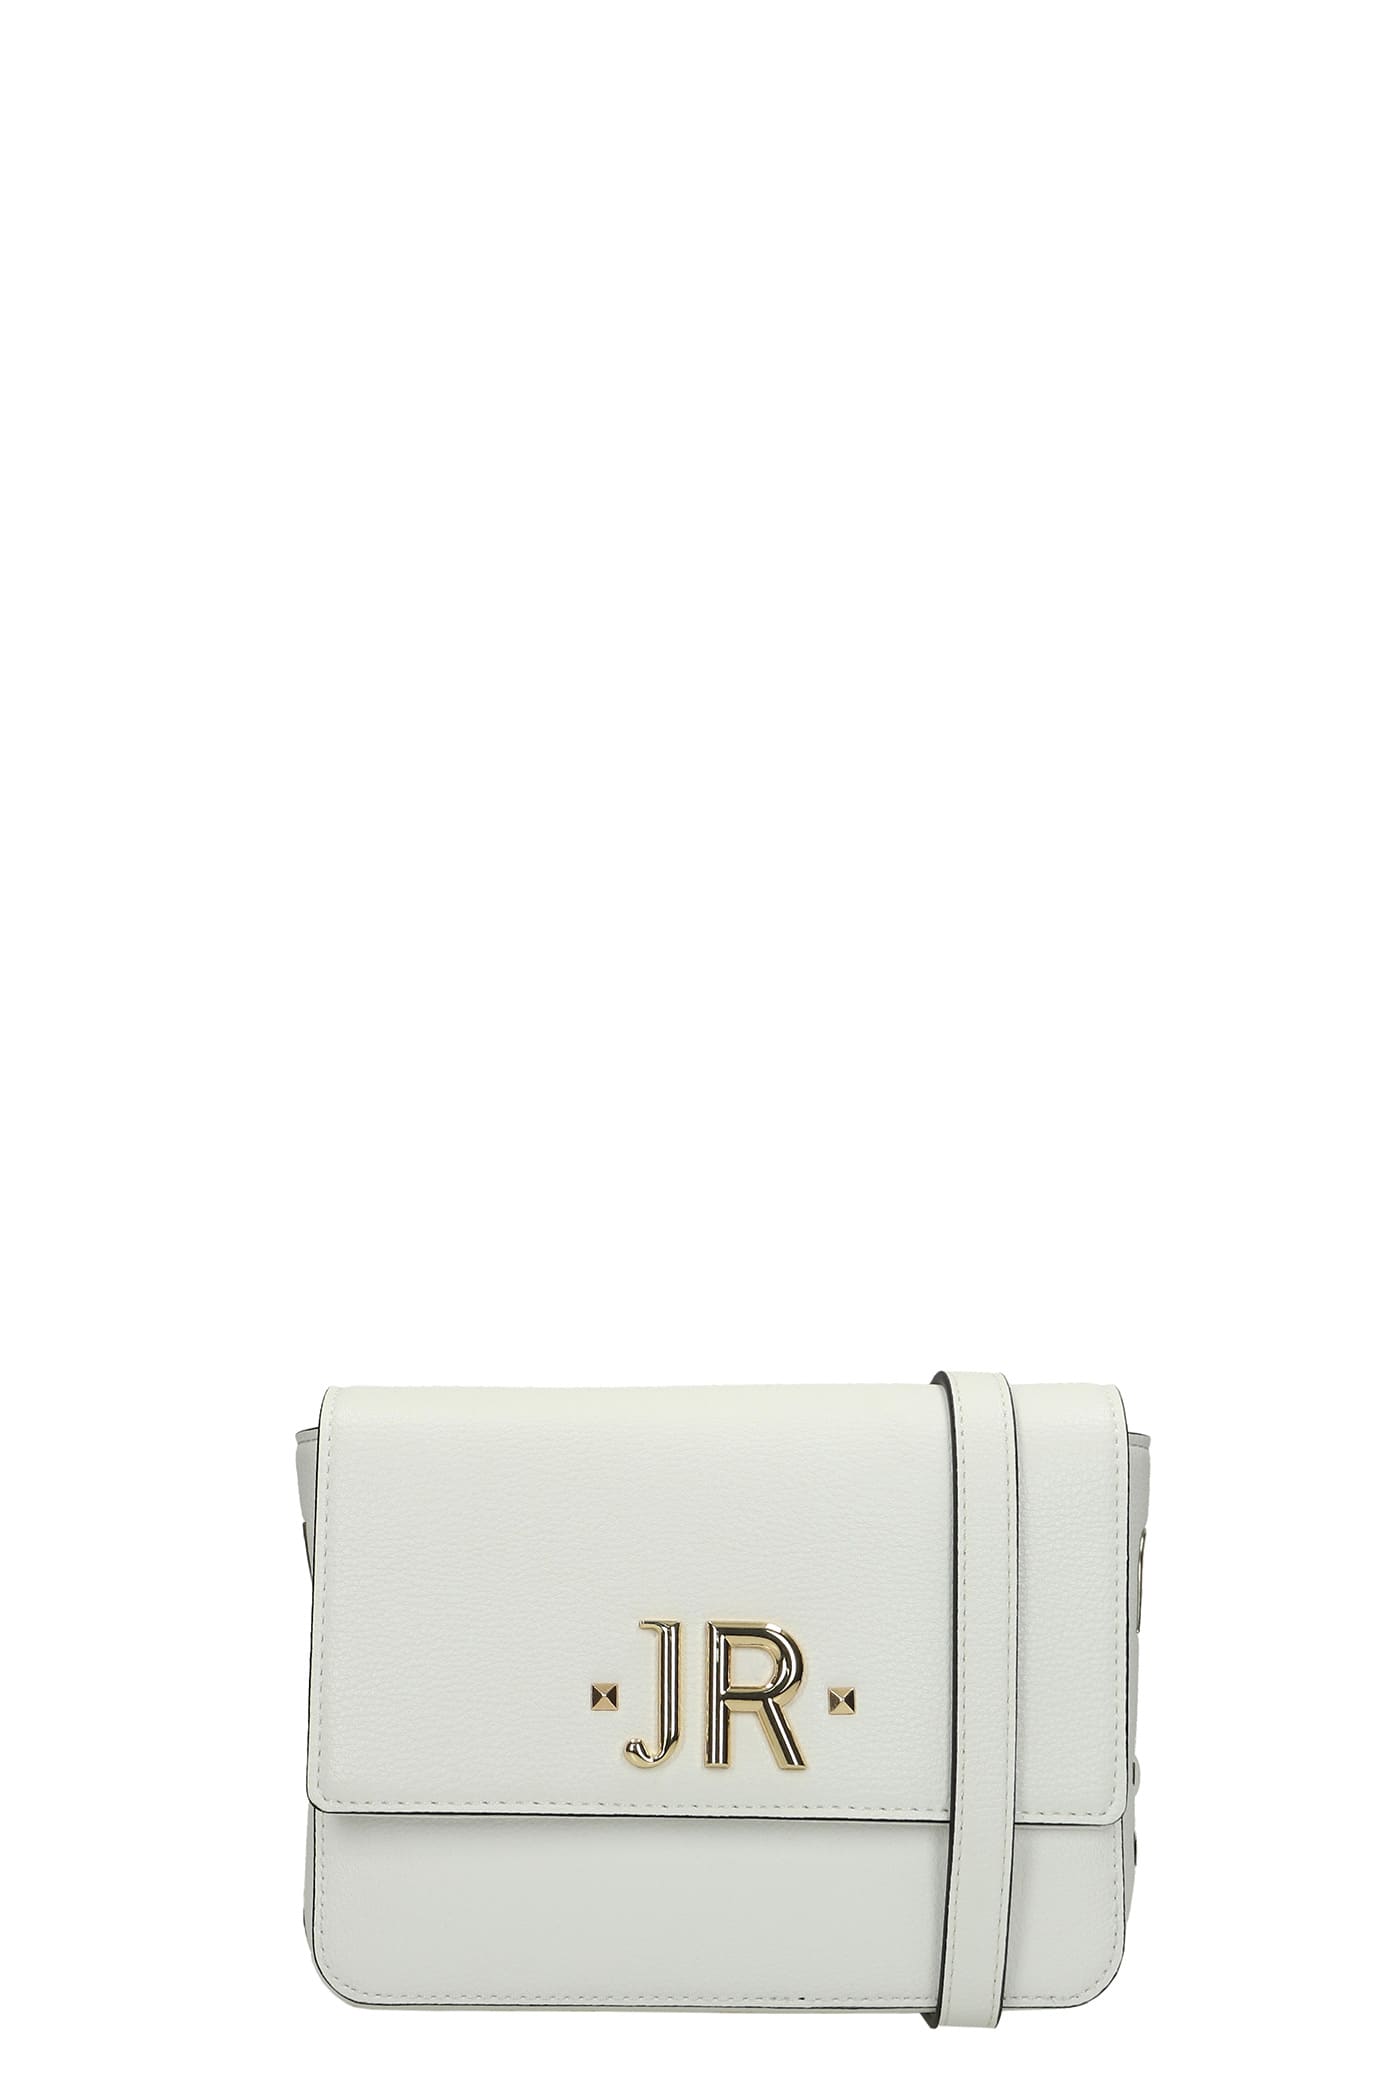 John Richmond Sepef Shoulder Bag In White Faux Leather